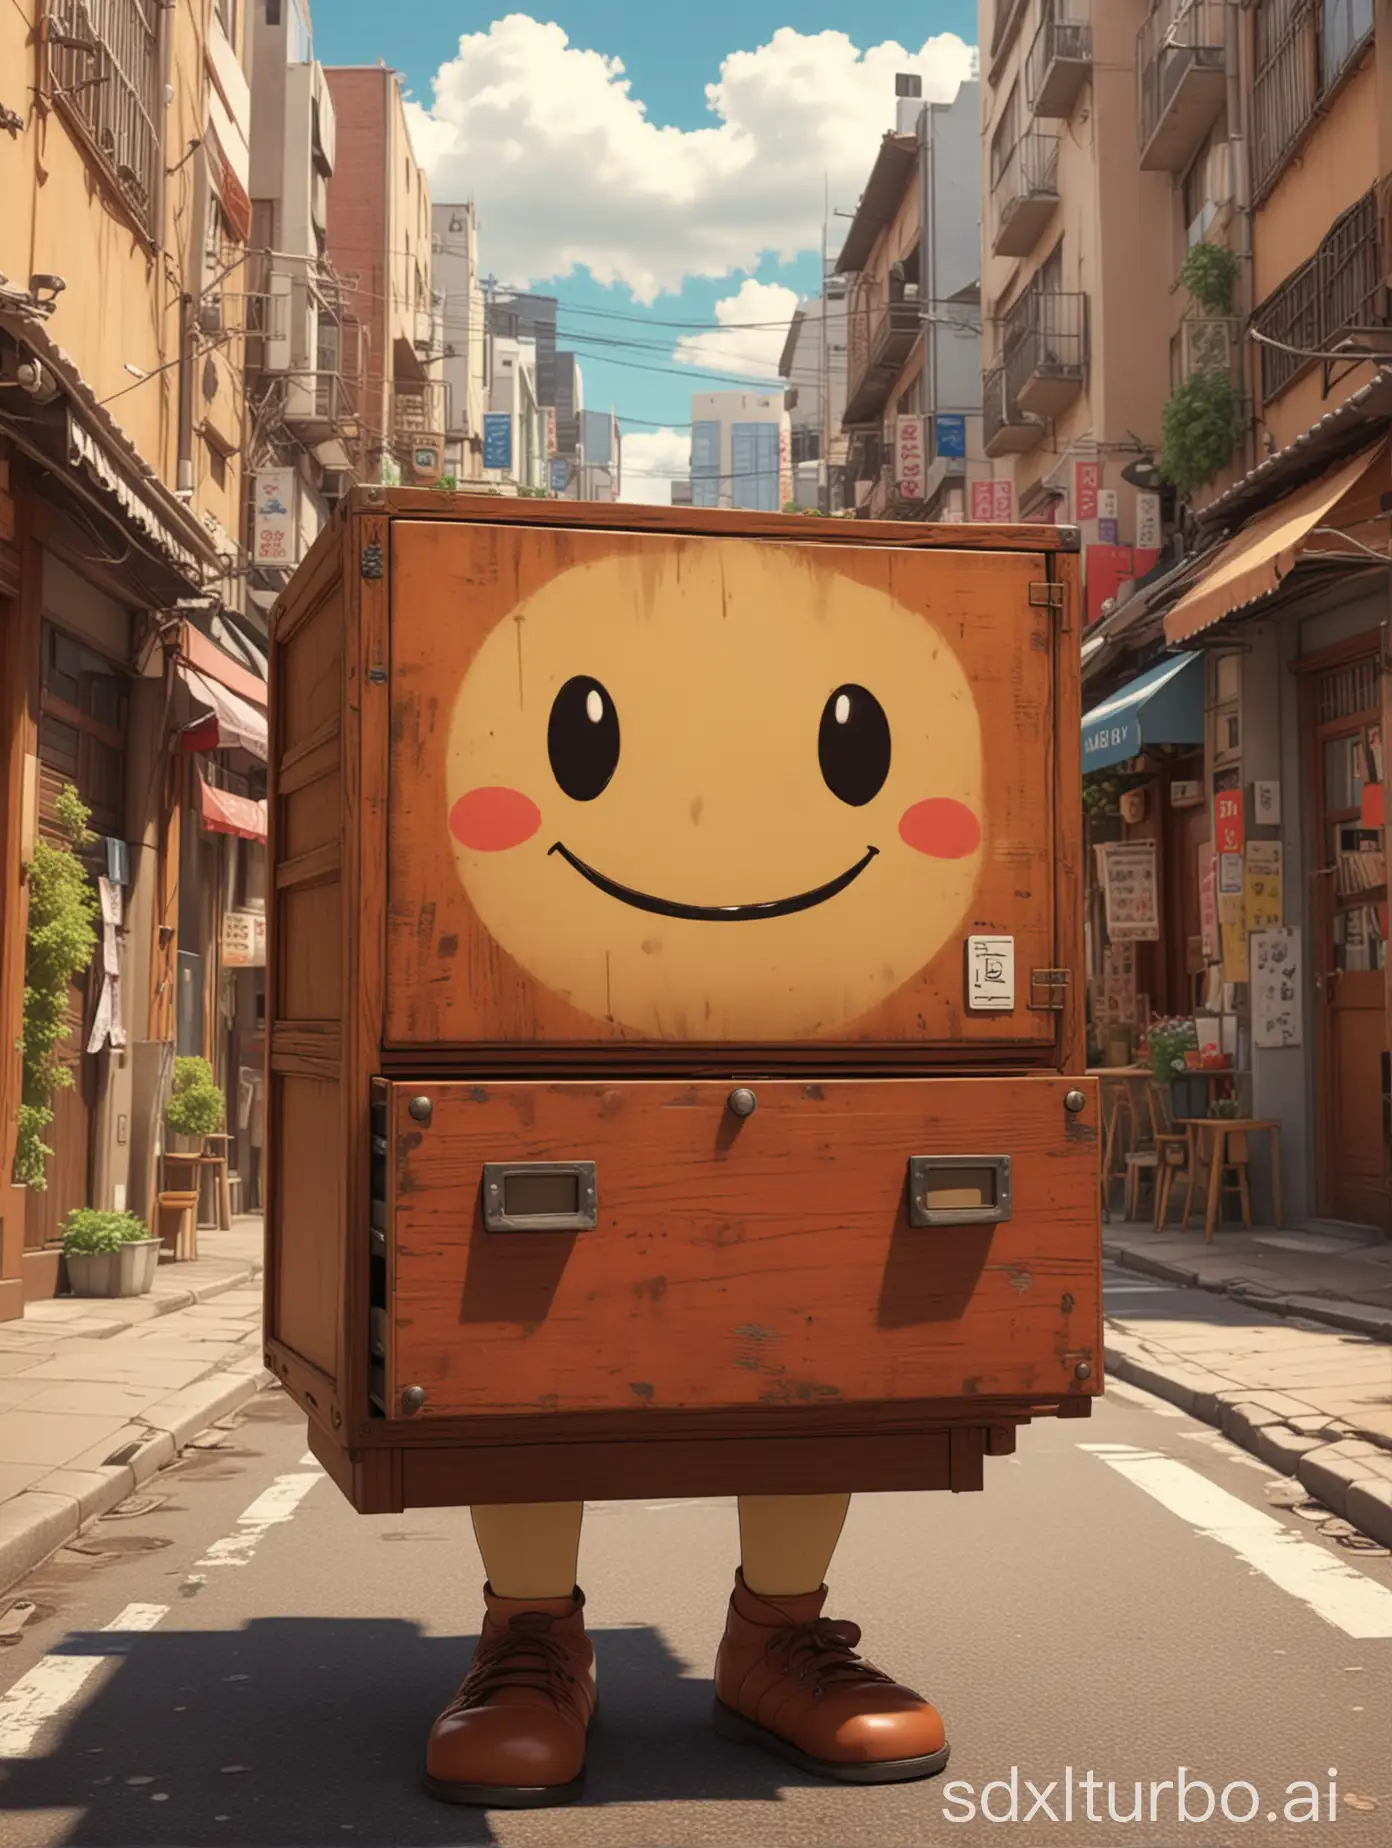 masterpiece, 4K, in a manga stylo of MiyazakiHayao,a smile face with hands and legs in a shape of a brown four-layer drawer,it merrily prancing along a lively and colorful street, cartoonish, bustling city backdrop, vibrant hues, playful and cheery atmospher